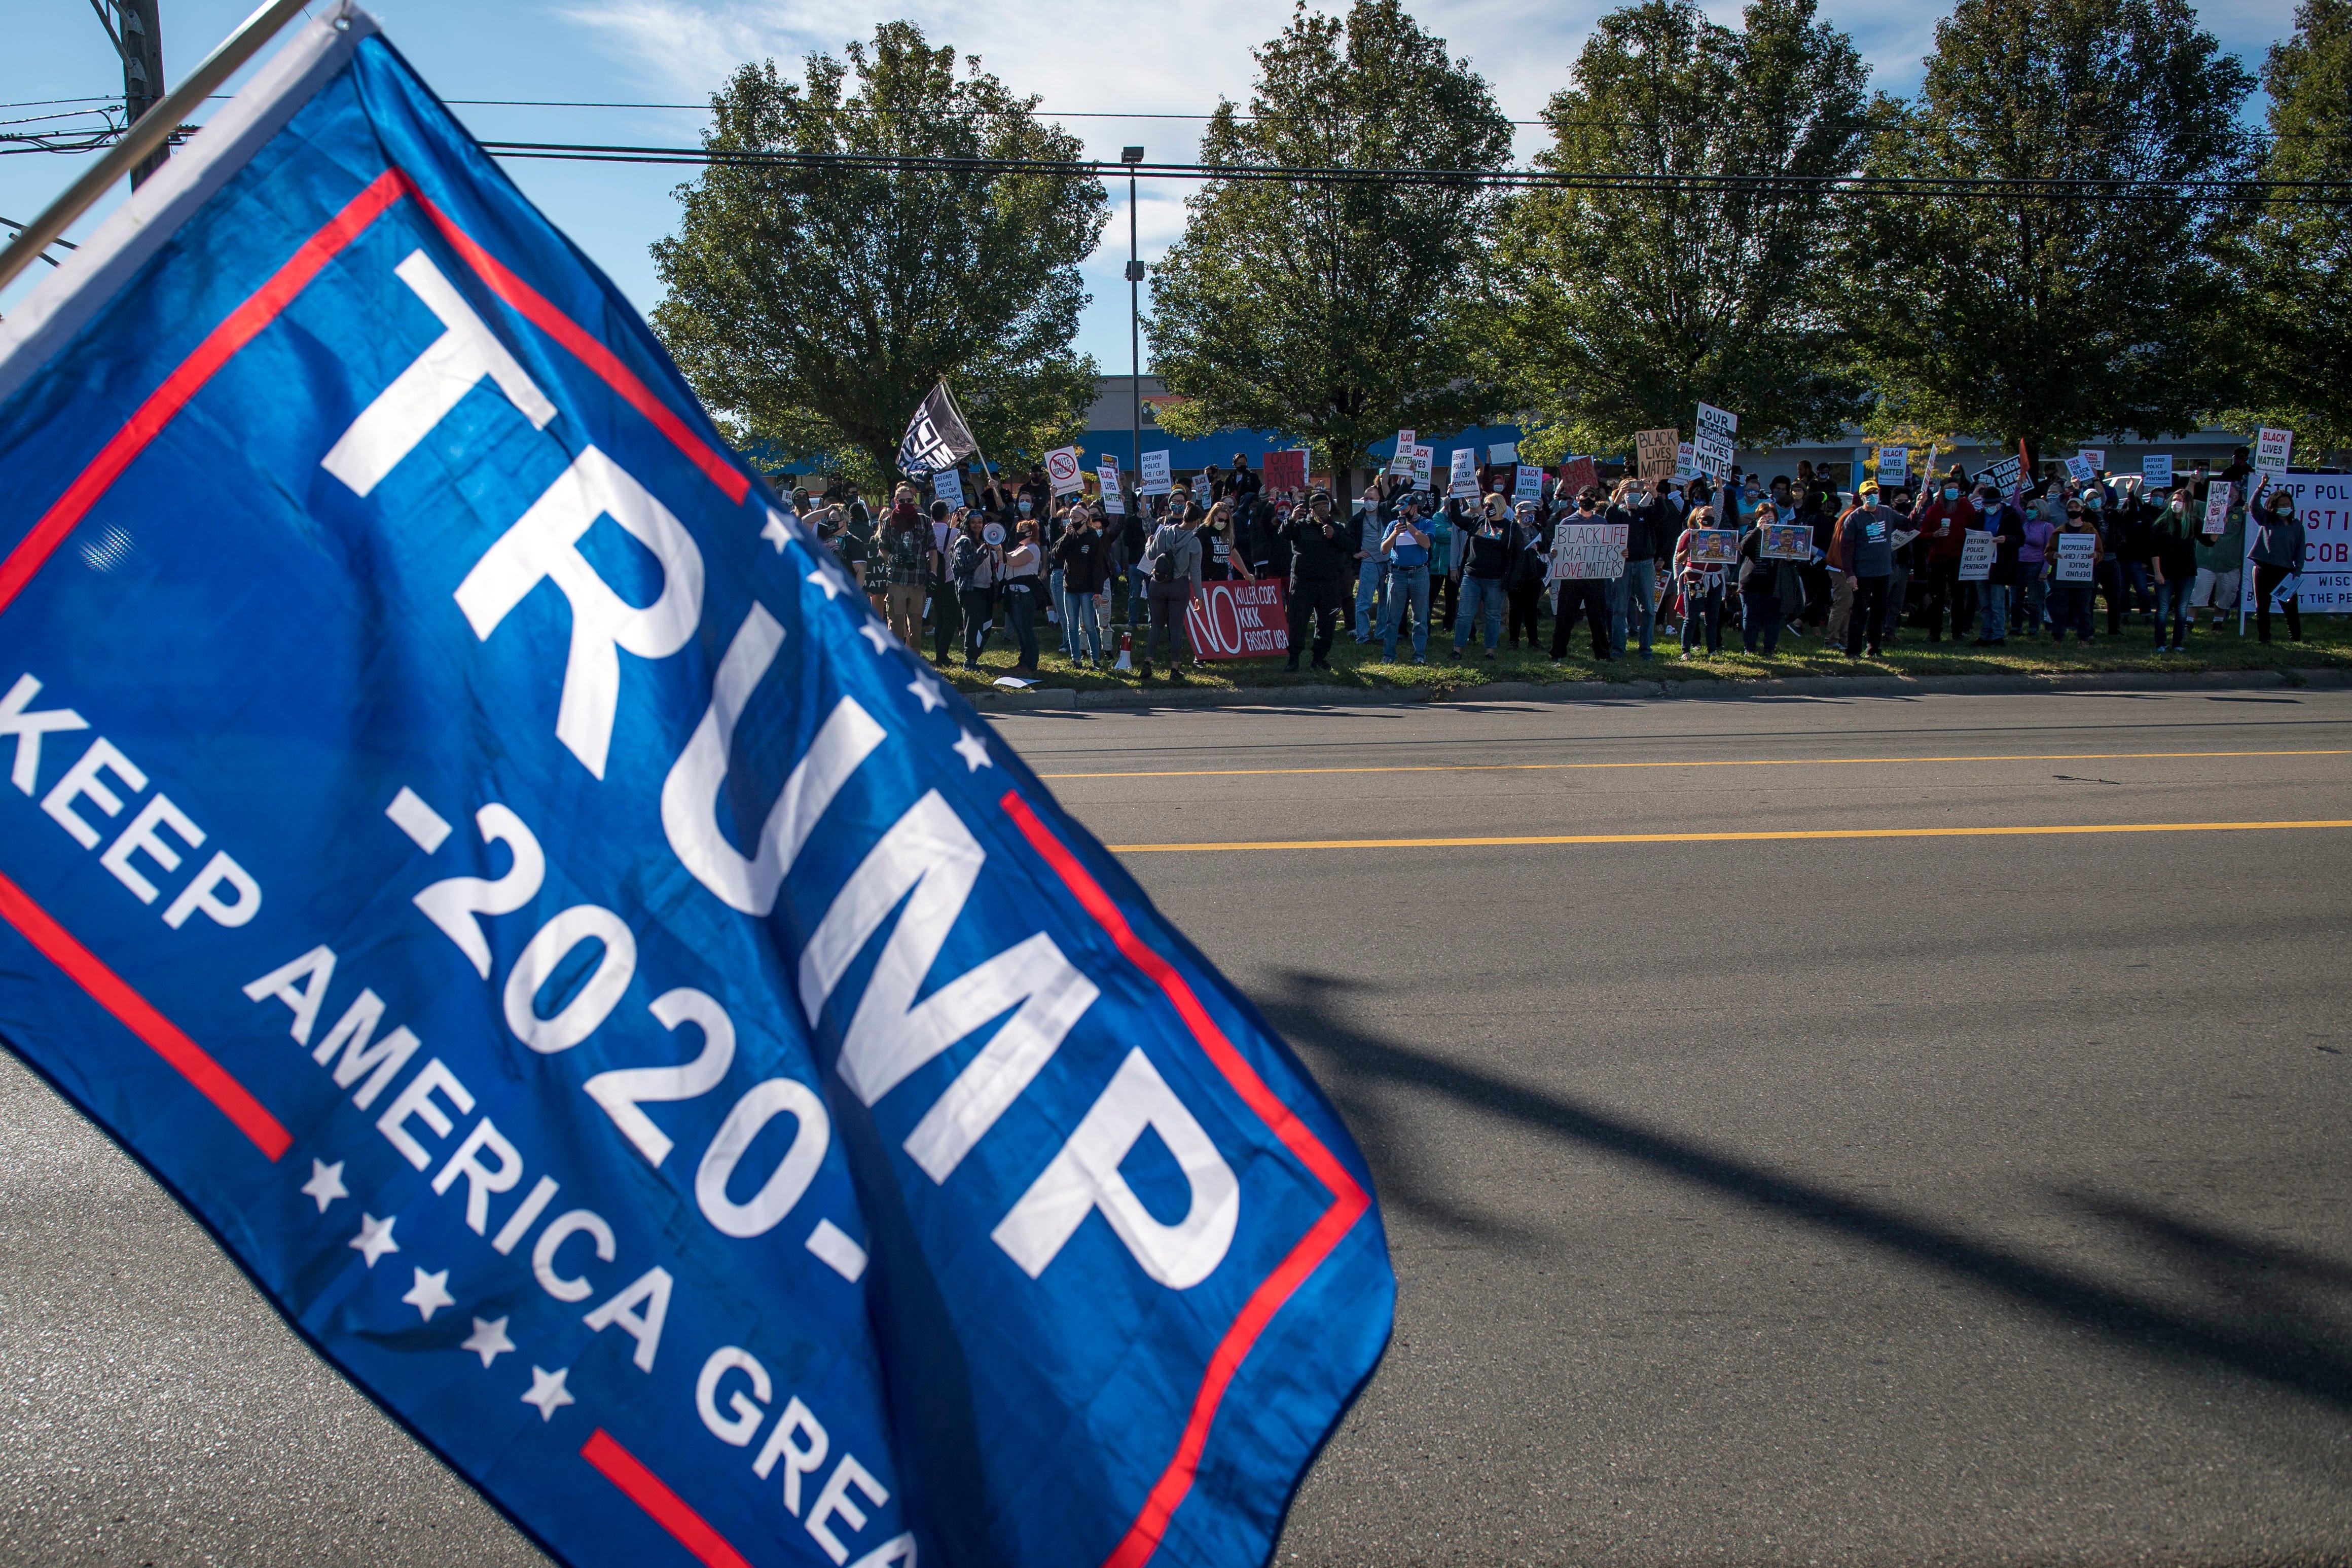 Trump supporters counter protest before the March Against Racism in Warren on Sept. 19, 2020. The march in Warren occurred in response to the city called hate crimes against residents Candace Hall, her husband Eddie and their two children.